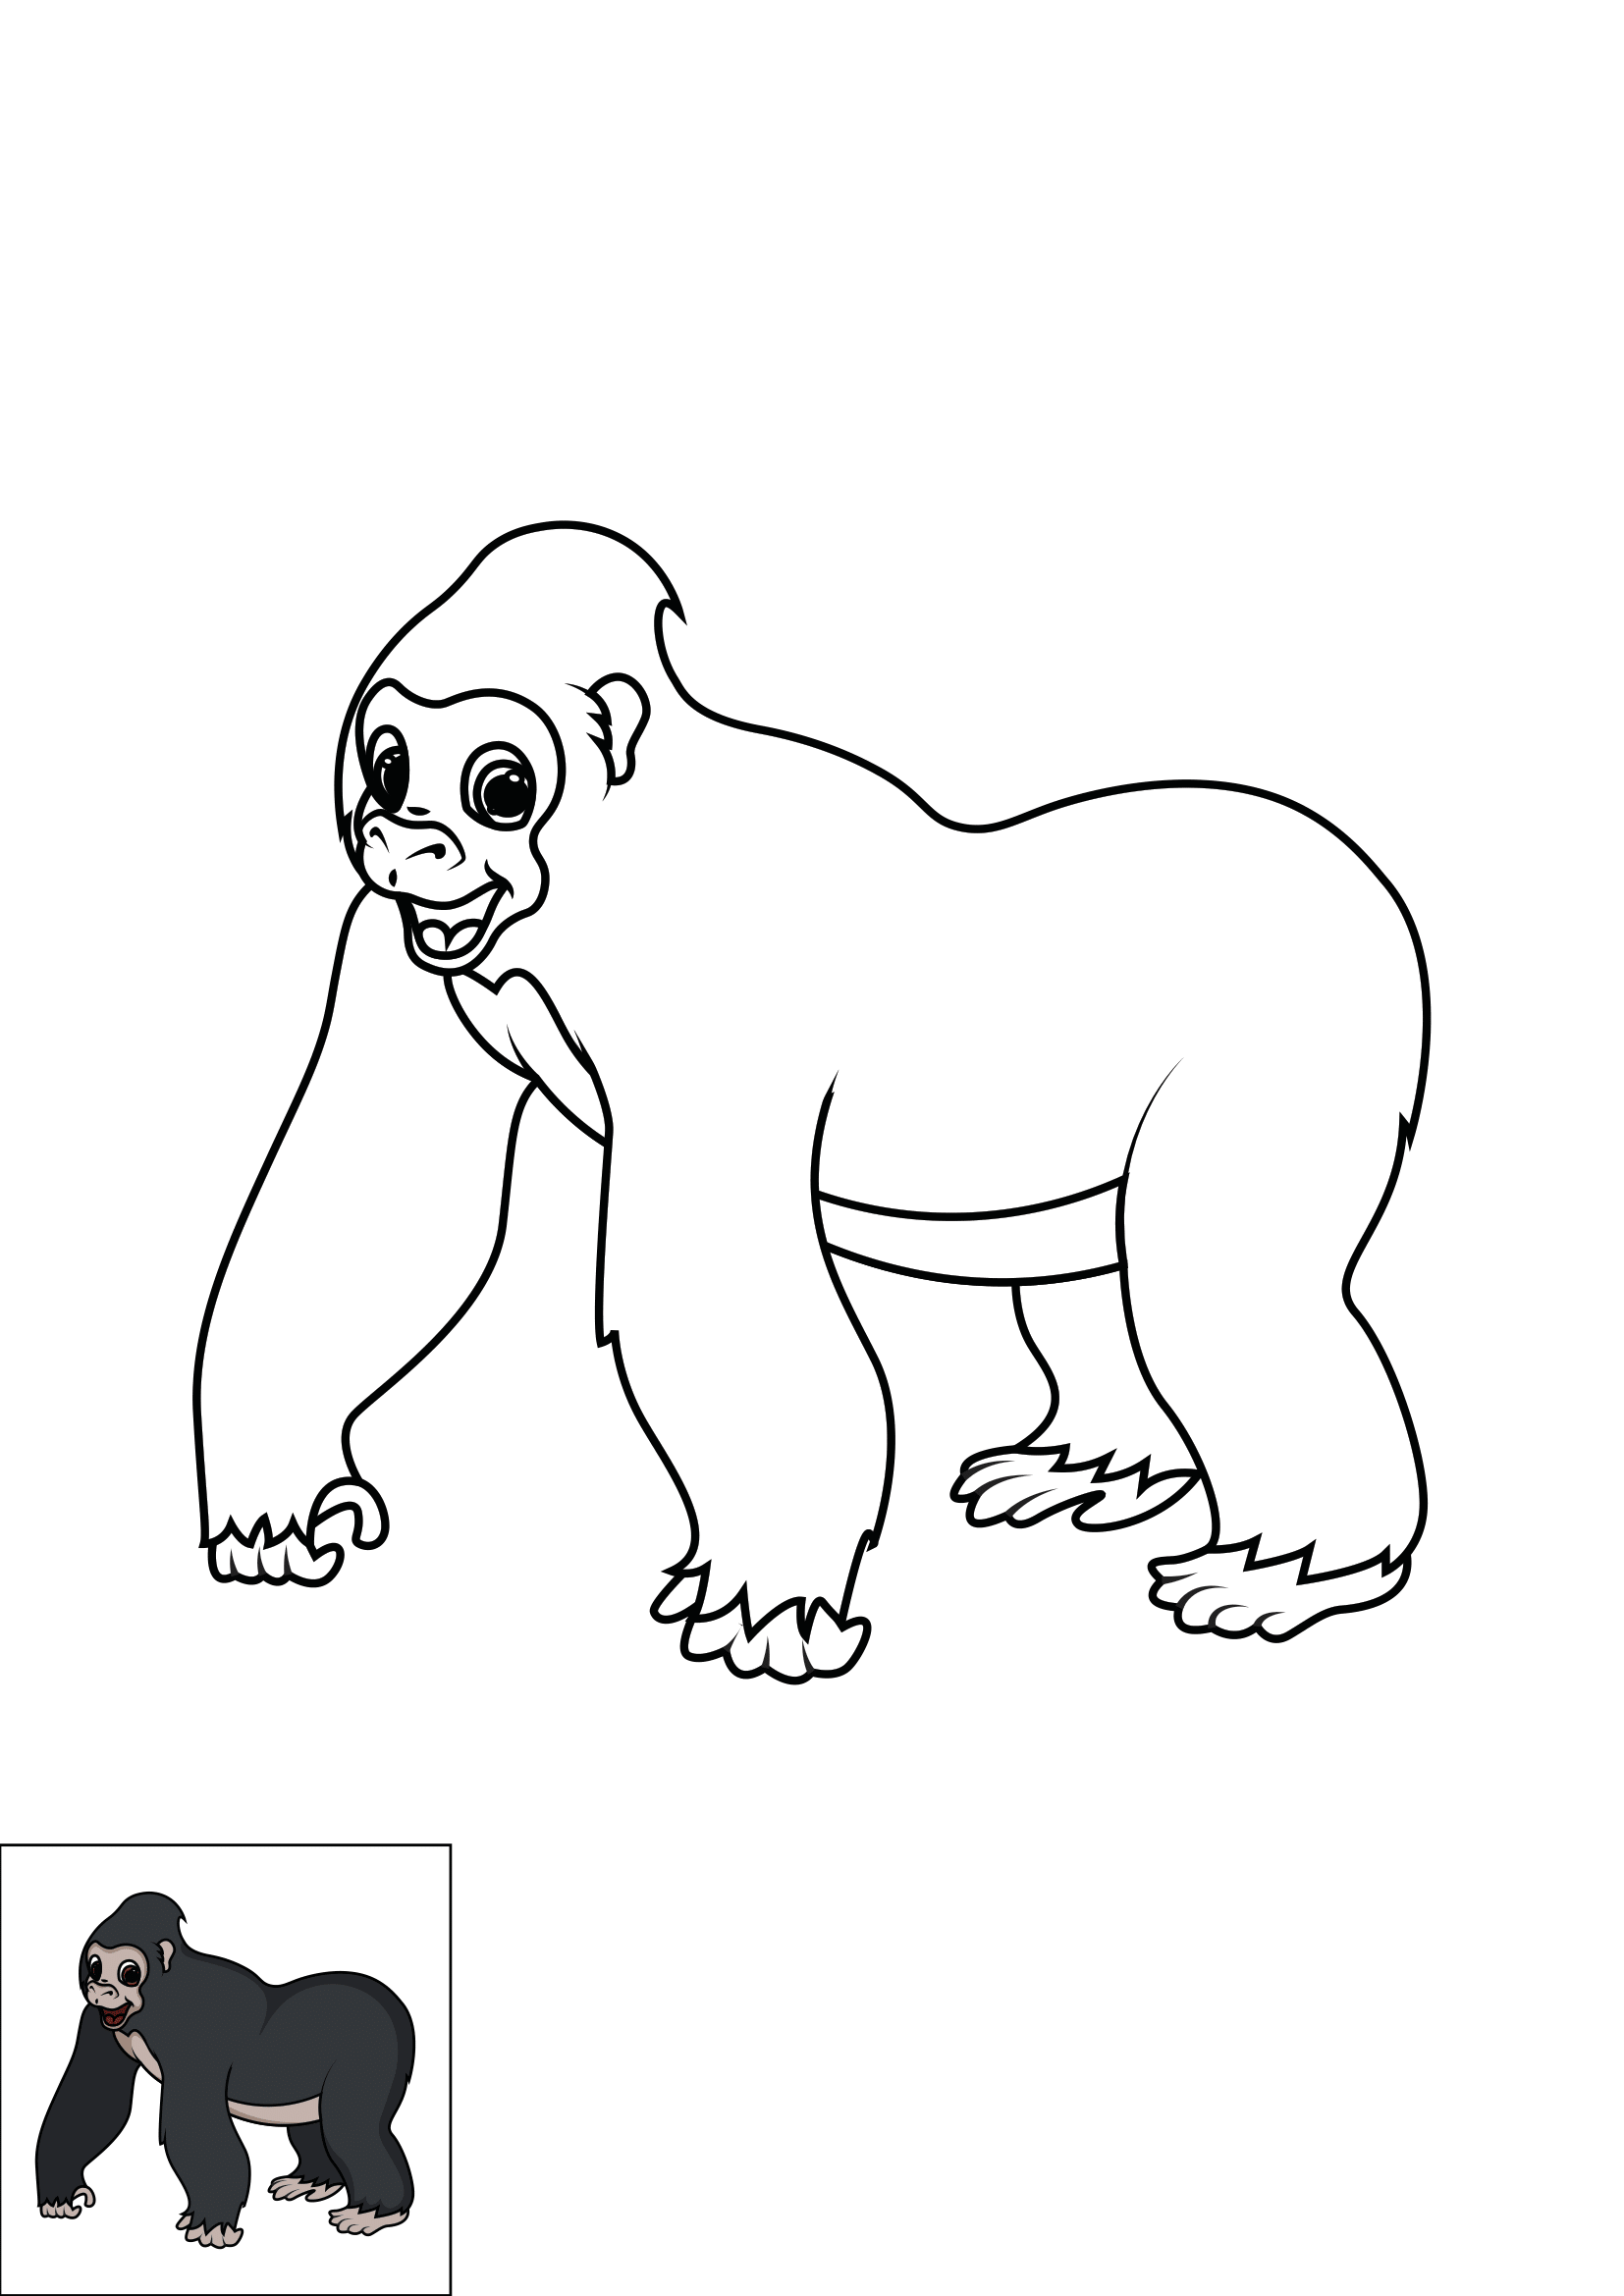 How to Draw A Gorilla Step by Step Printable Color